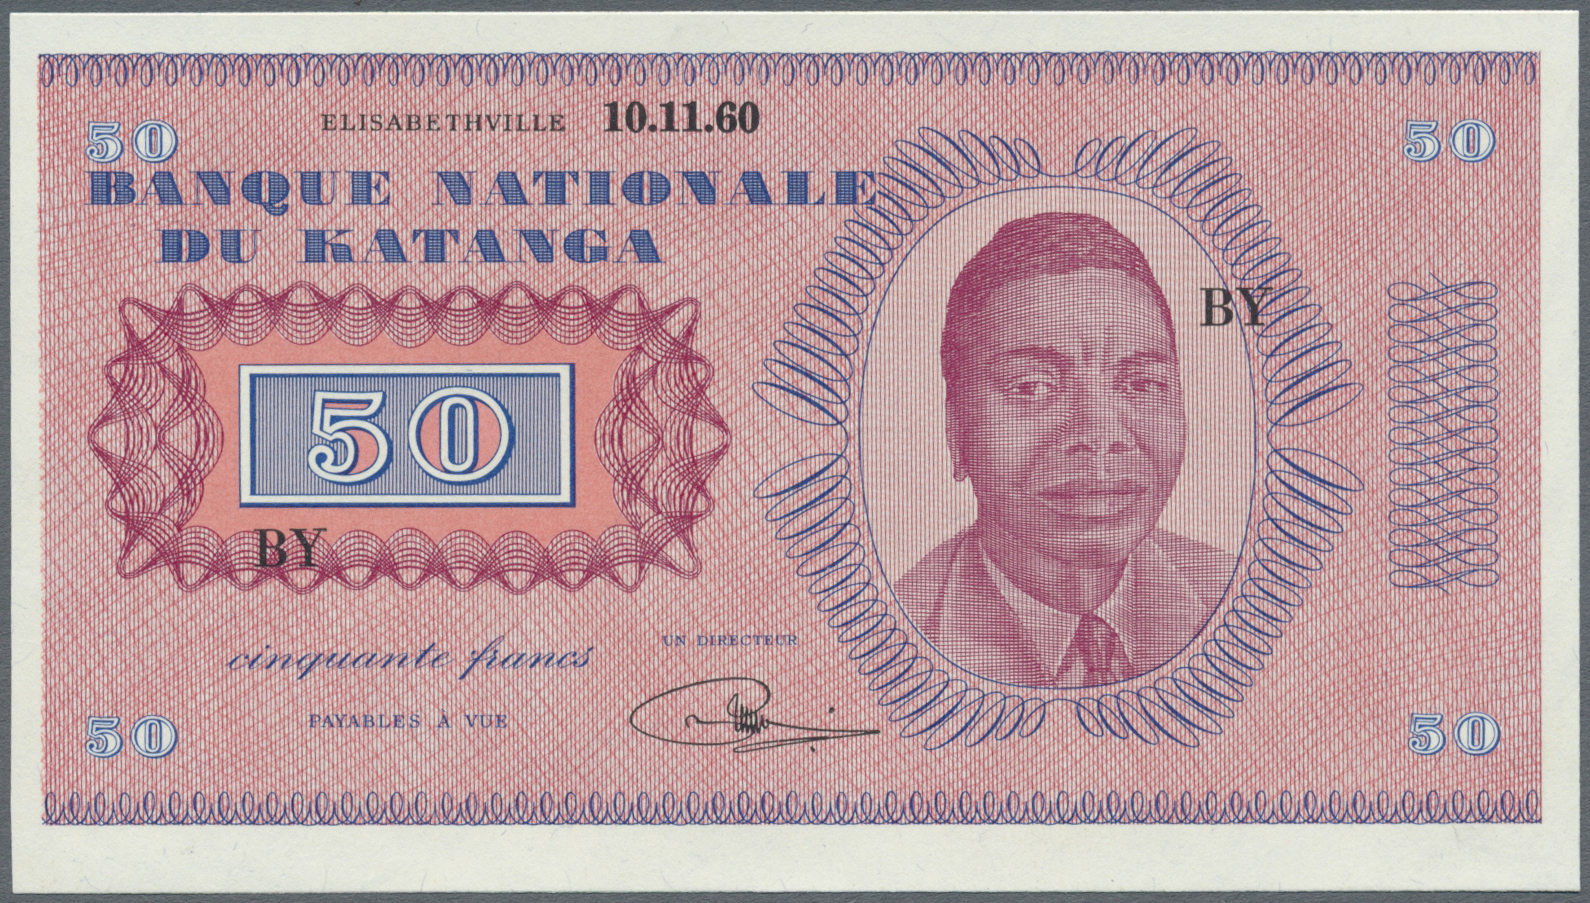 01331 Katanga: 50 Francs 1950 P. 7 With Date Printed And Serial Prefix "BY" In Condition: UNC. - Other - Africa